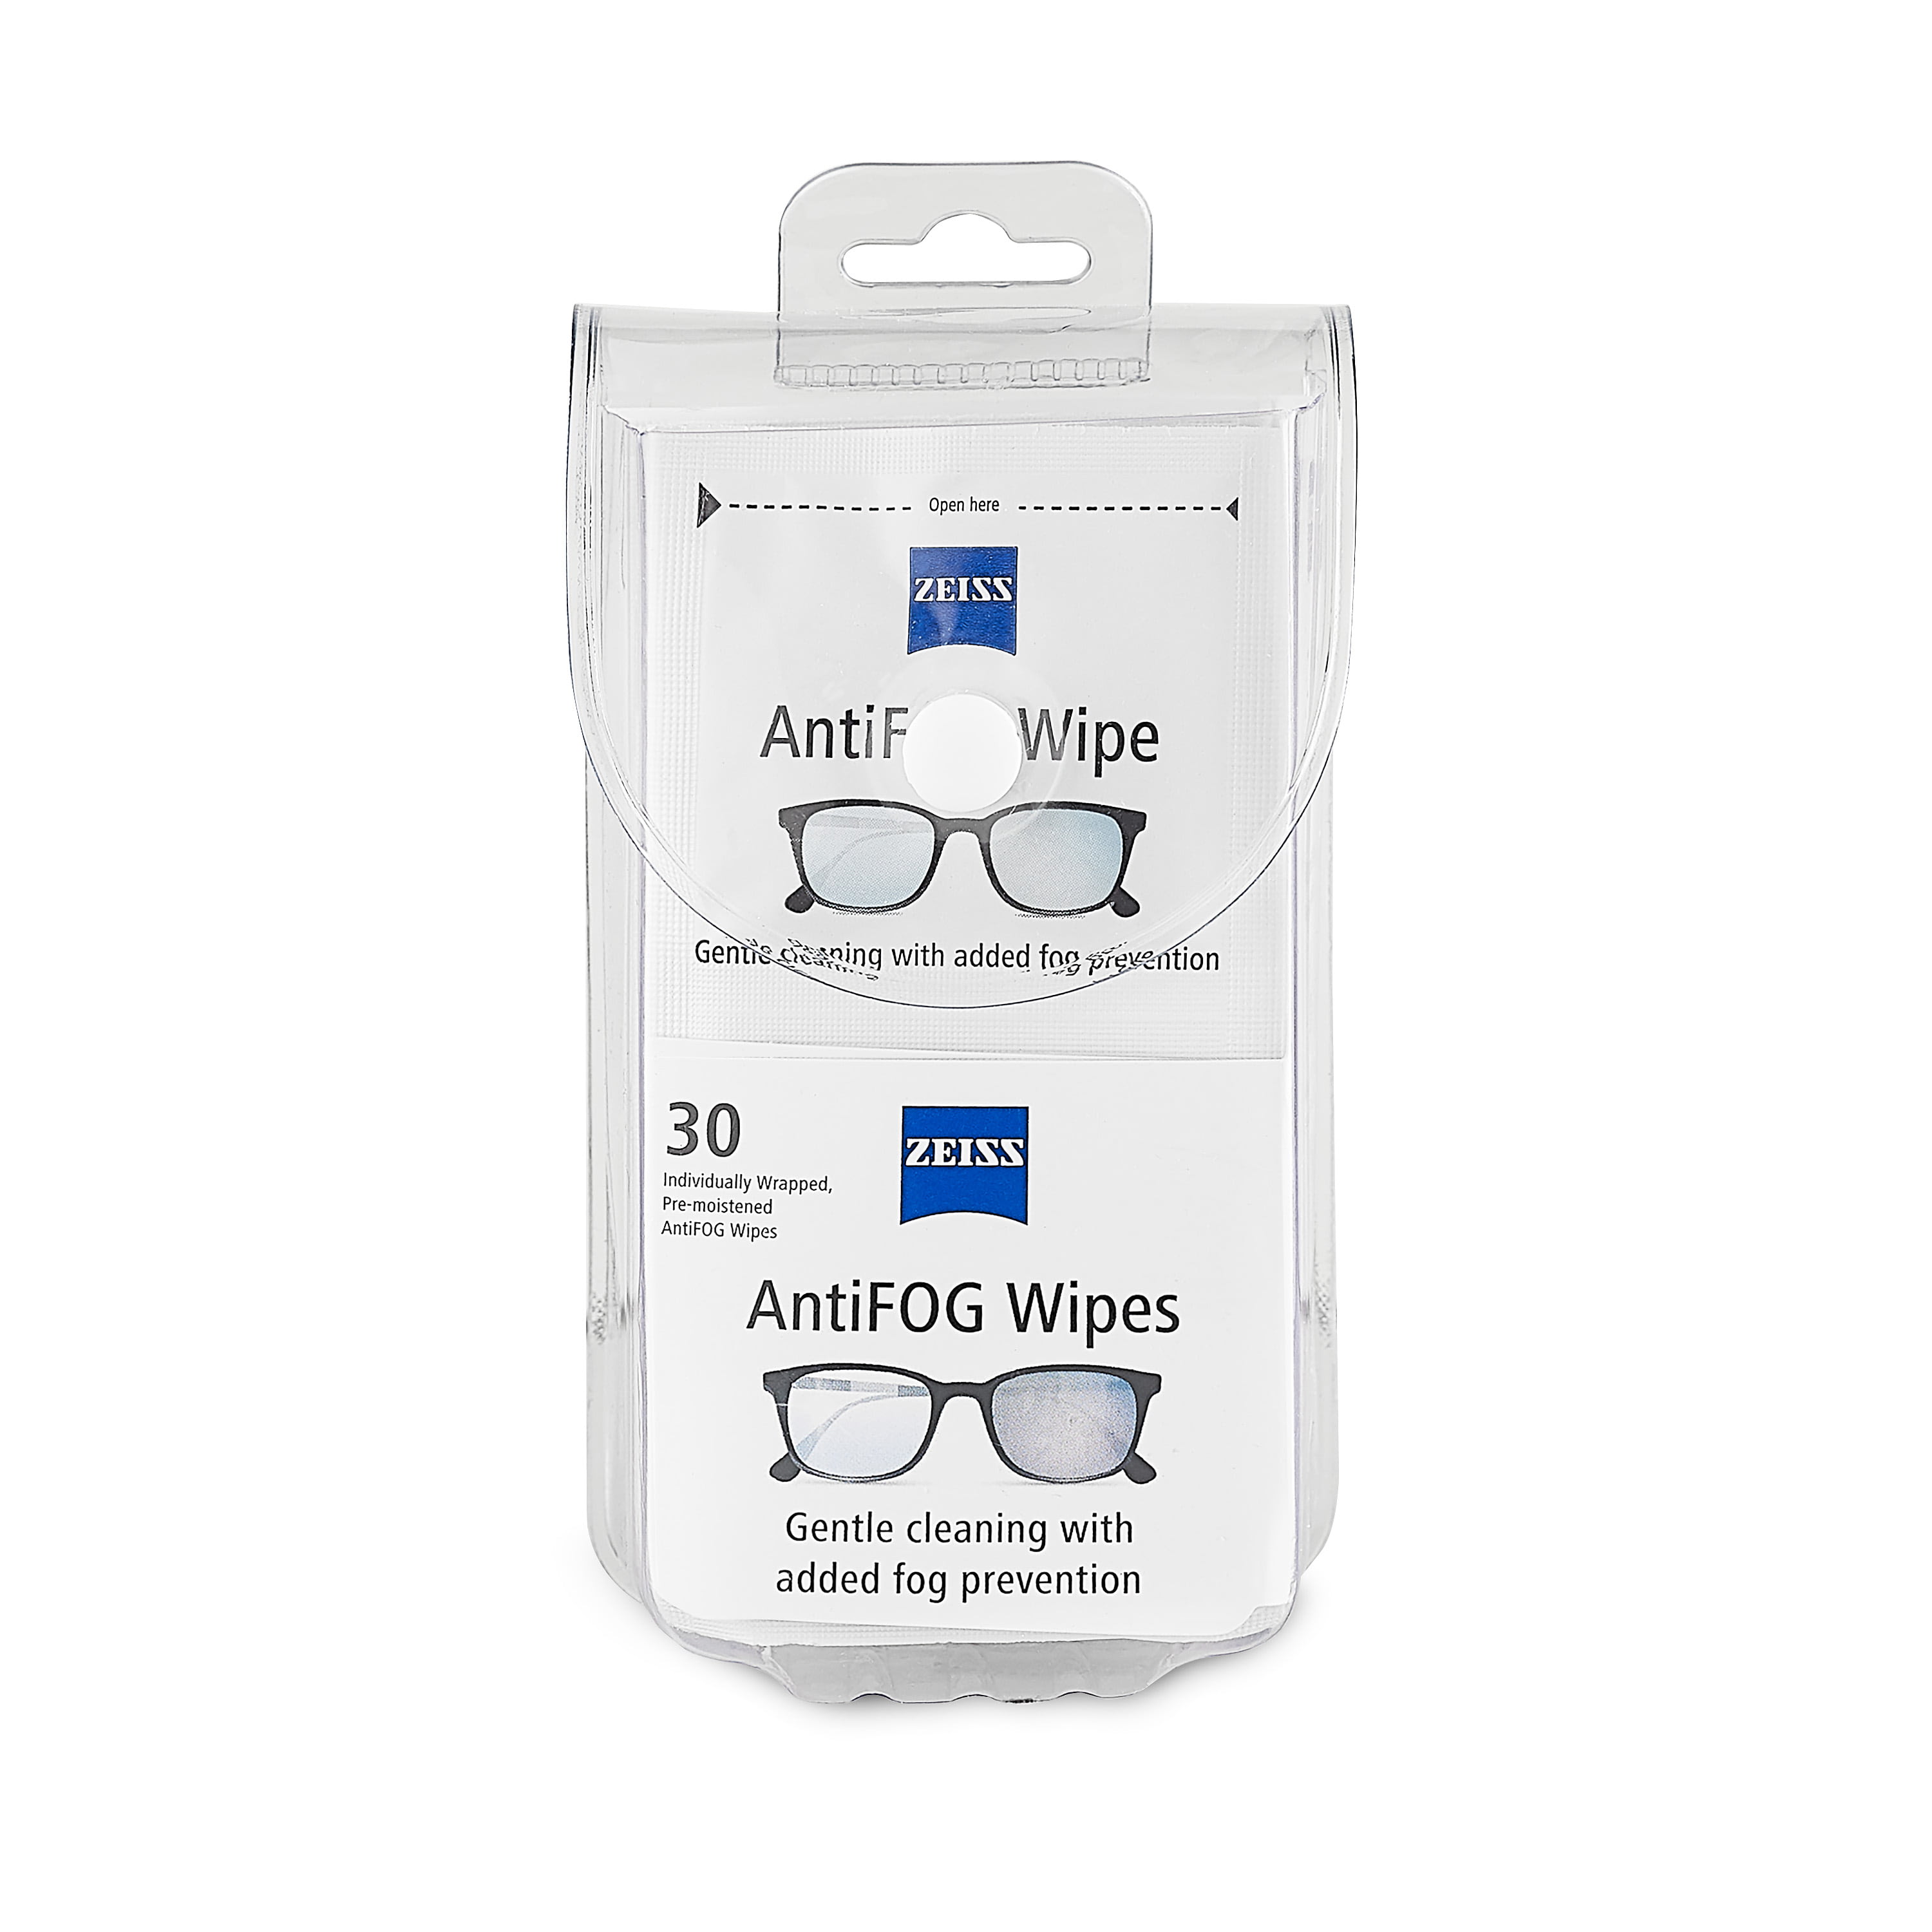 ZEISS Lens Wipes, Pre-Moistened Eye Glass Cleaner Wipes, 100 Count